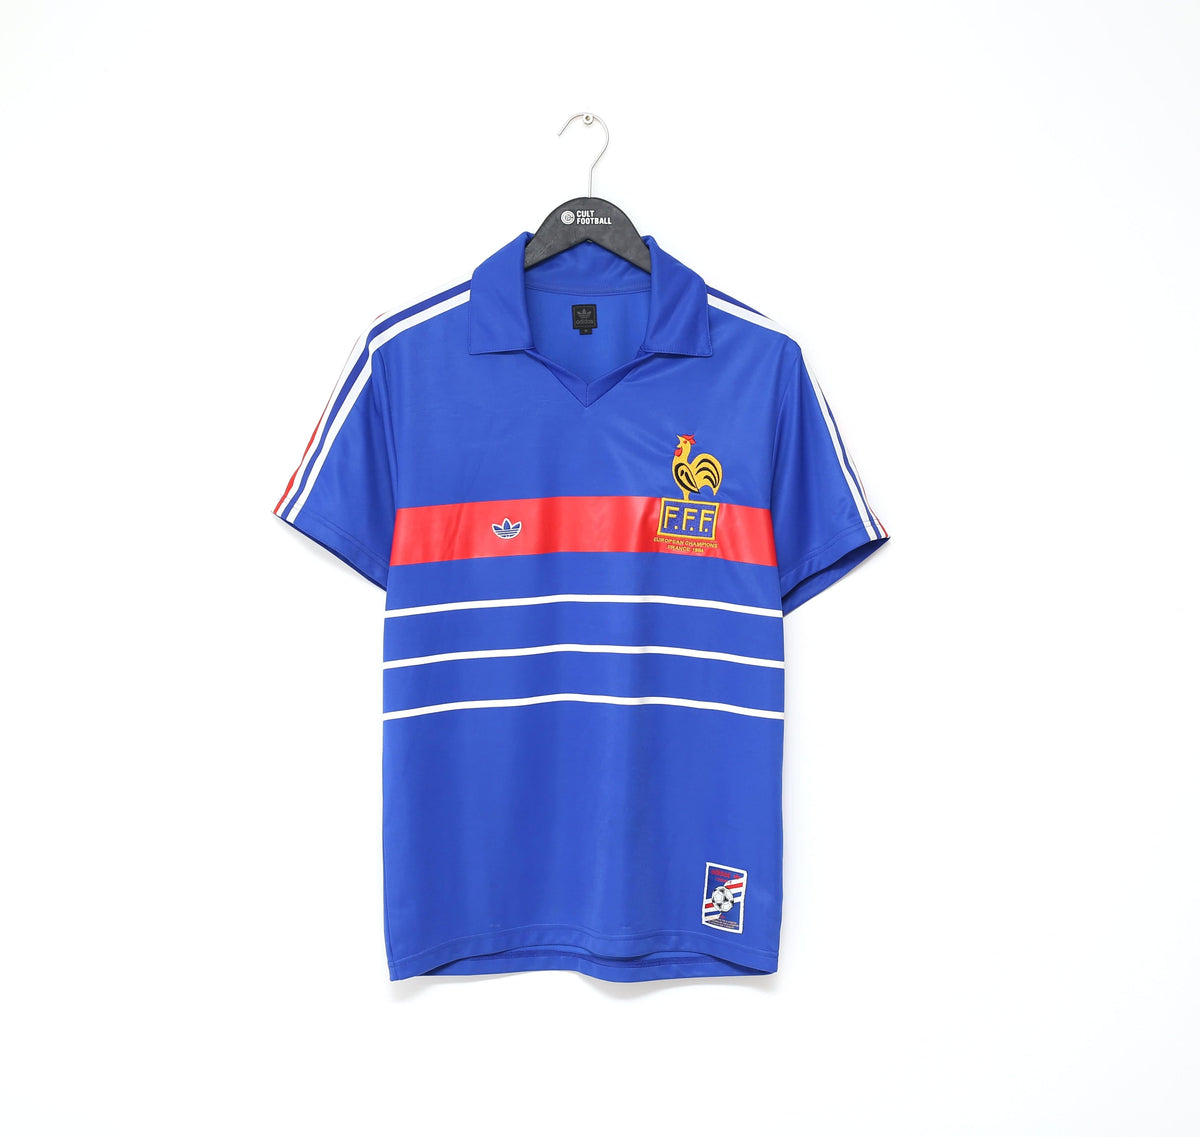 18 best retro football shirts for a nostalgic 'fit of champions